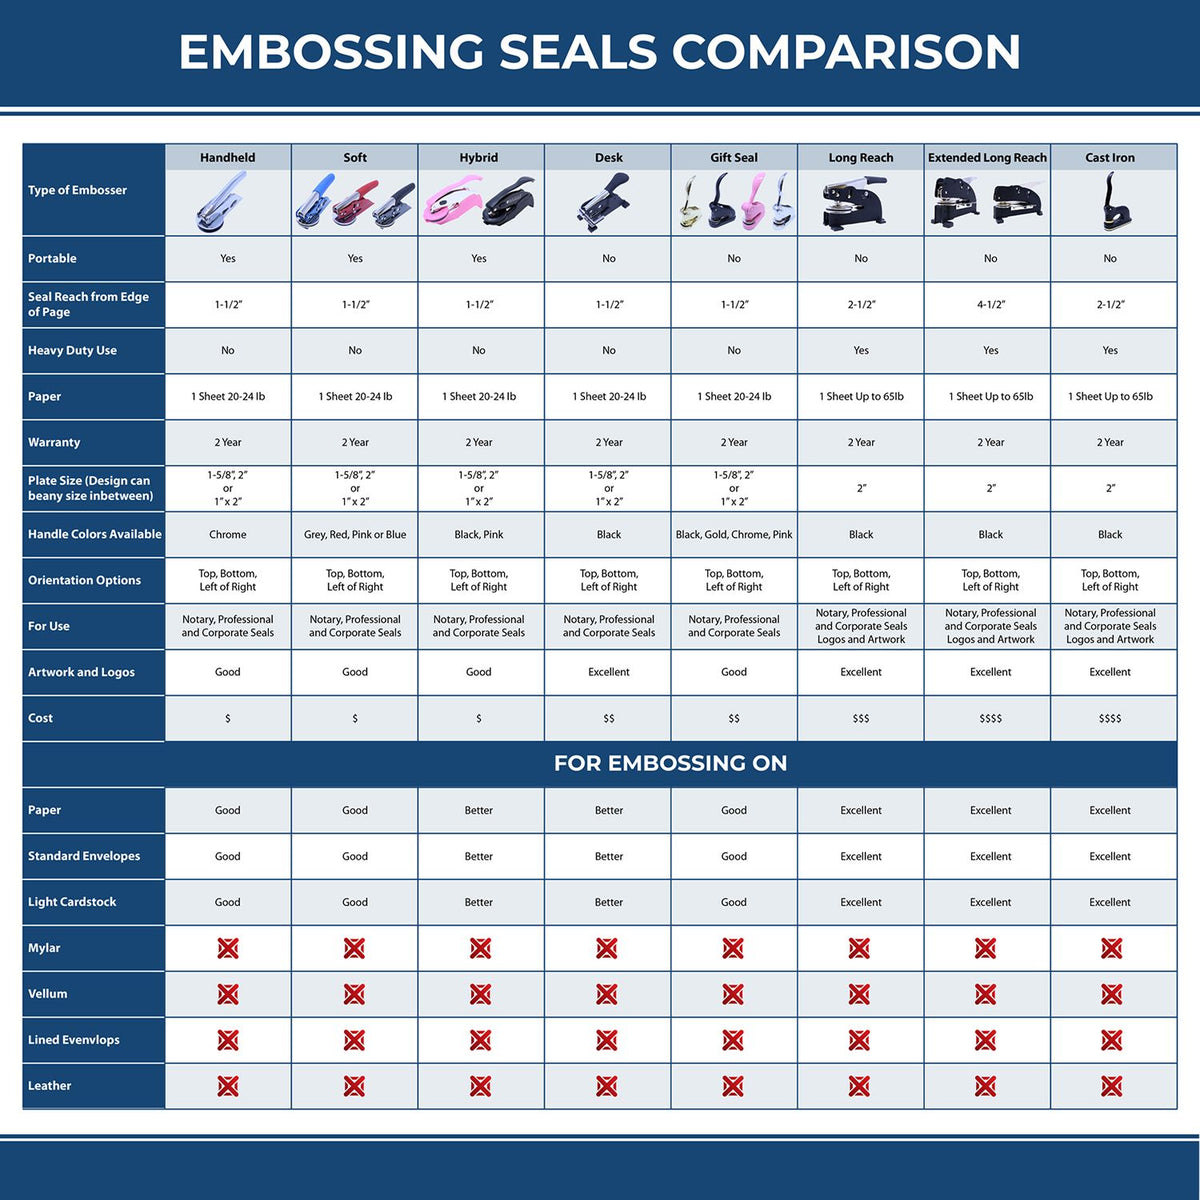 A comparison chart for the different types of mount models available for the Hybrid Oklahoma Geologist Seal